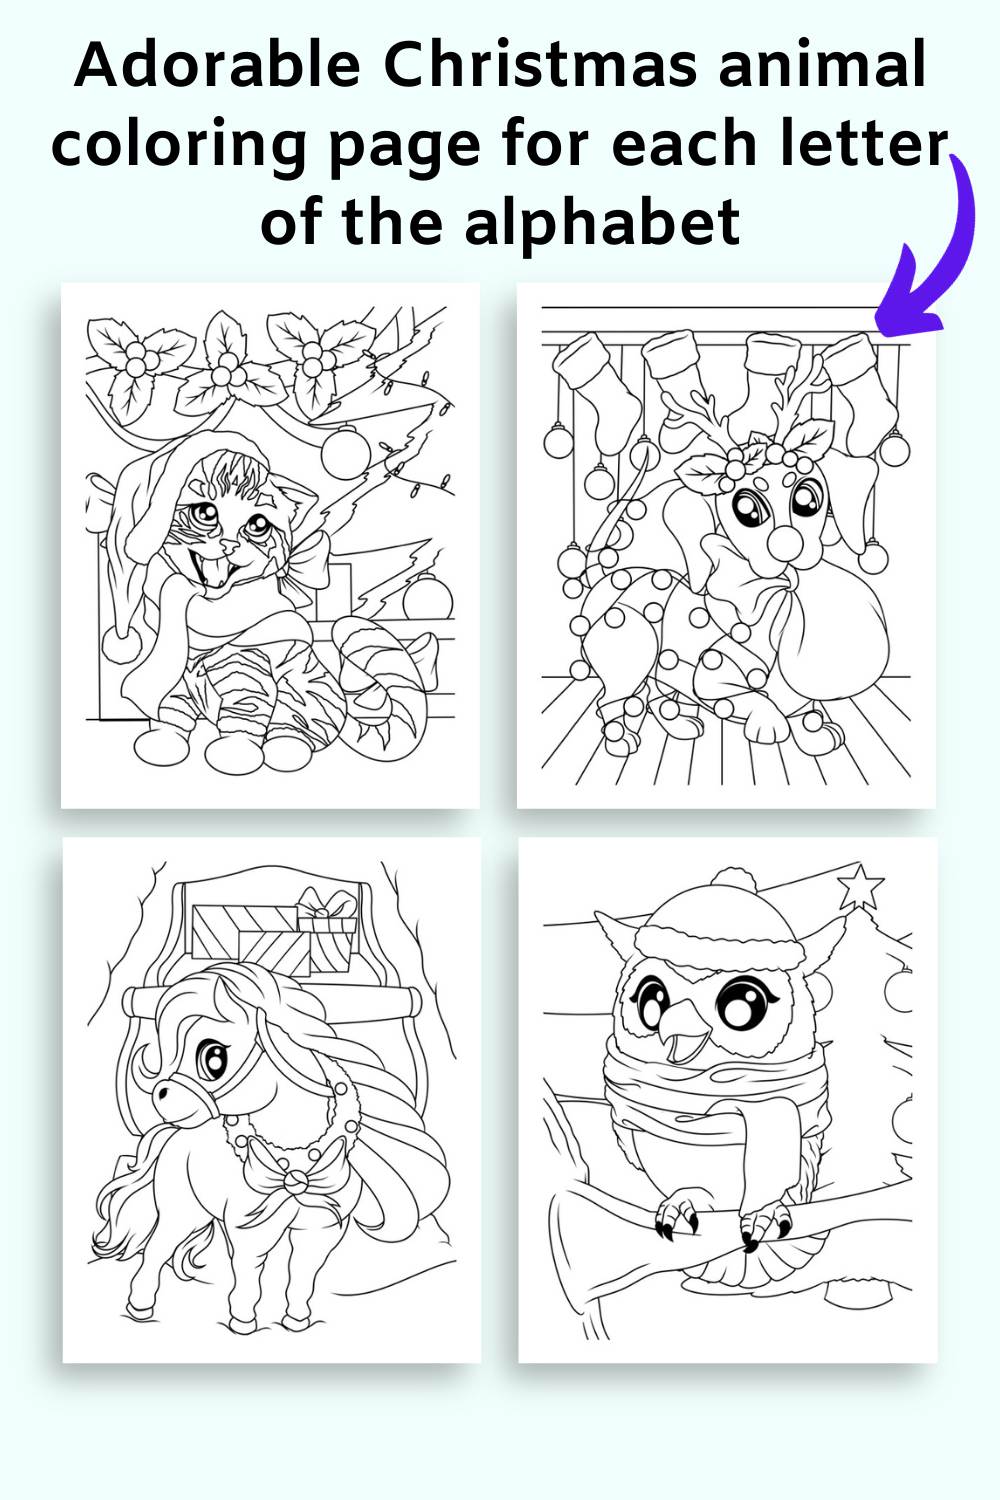 Text "adorable Christmas animal coloring page for each letter of the alphabet" with coloring pages of a cat, a dog, a horse, and an owl